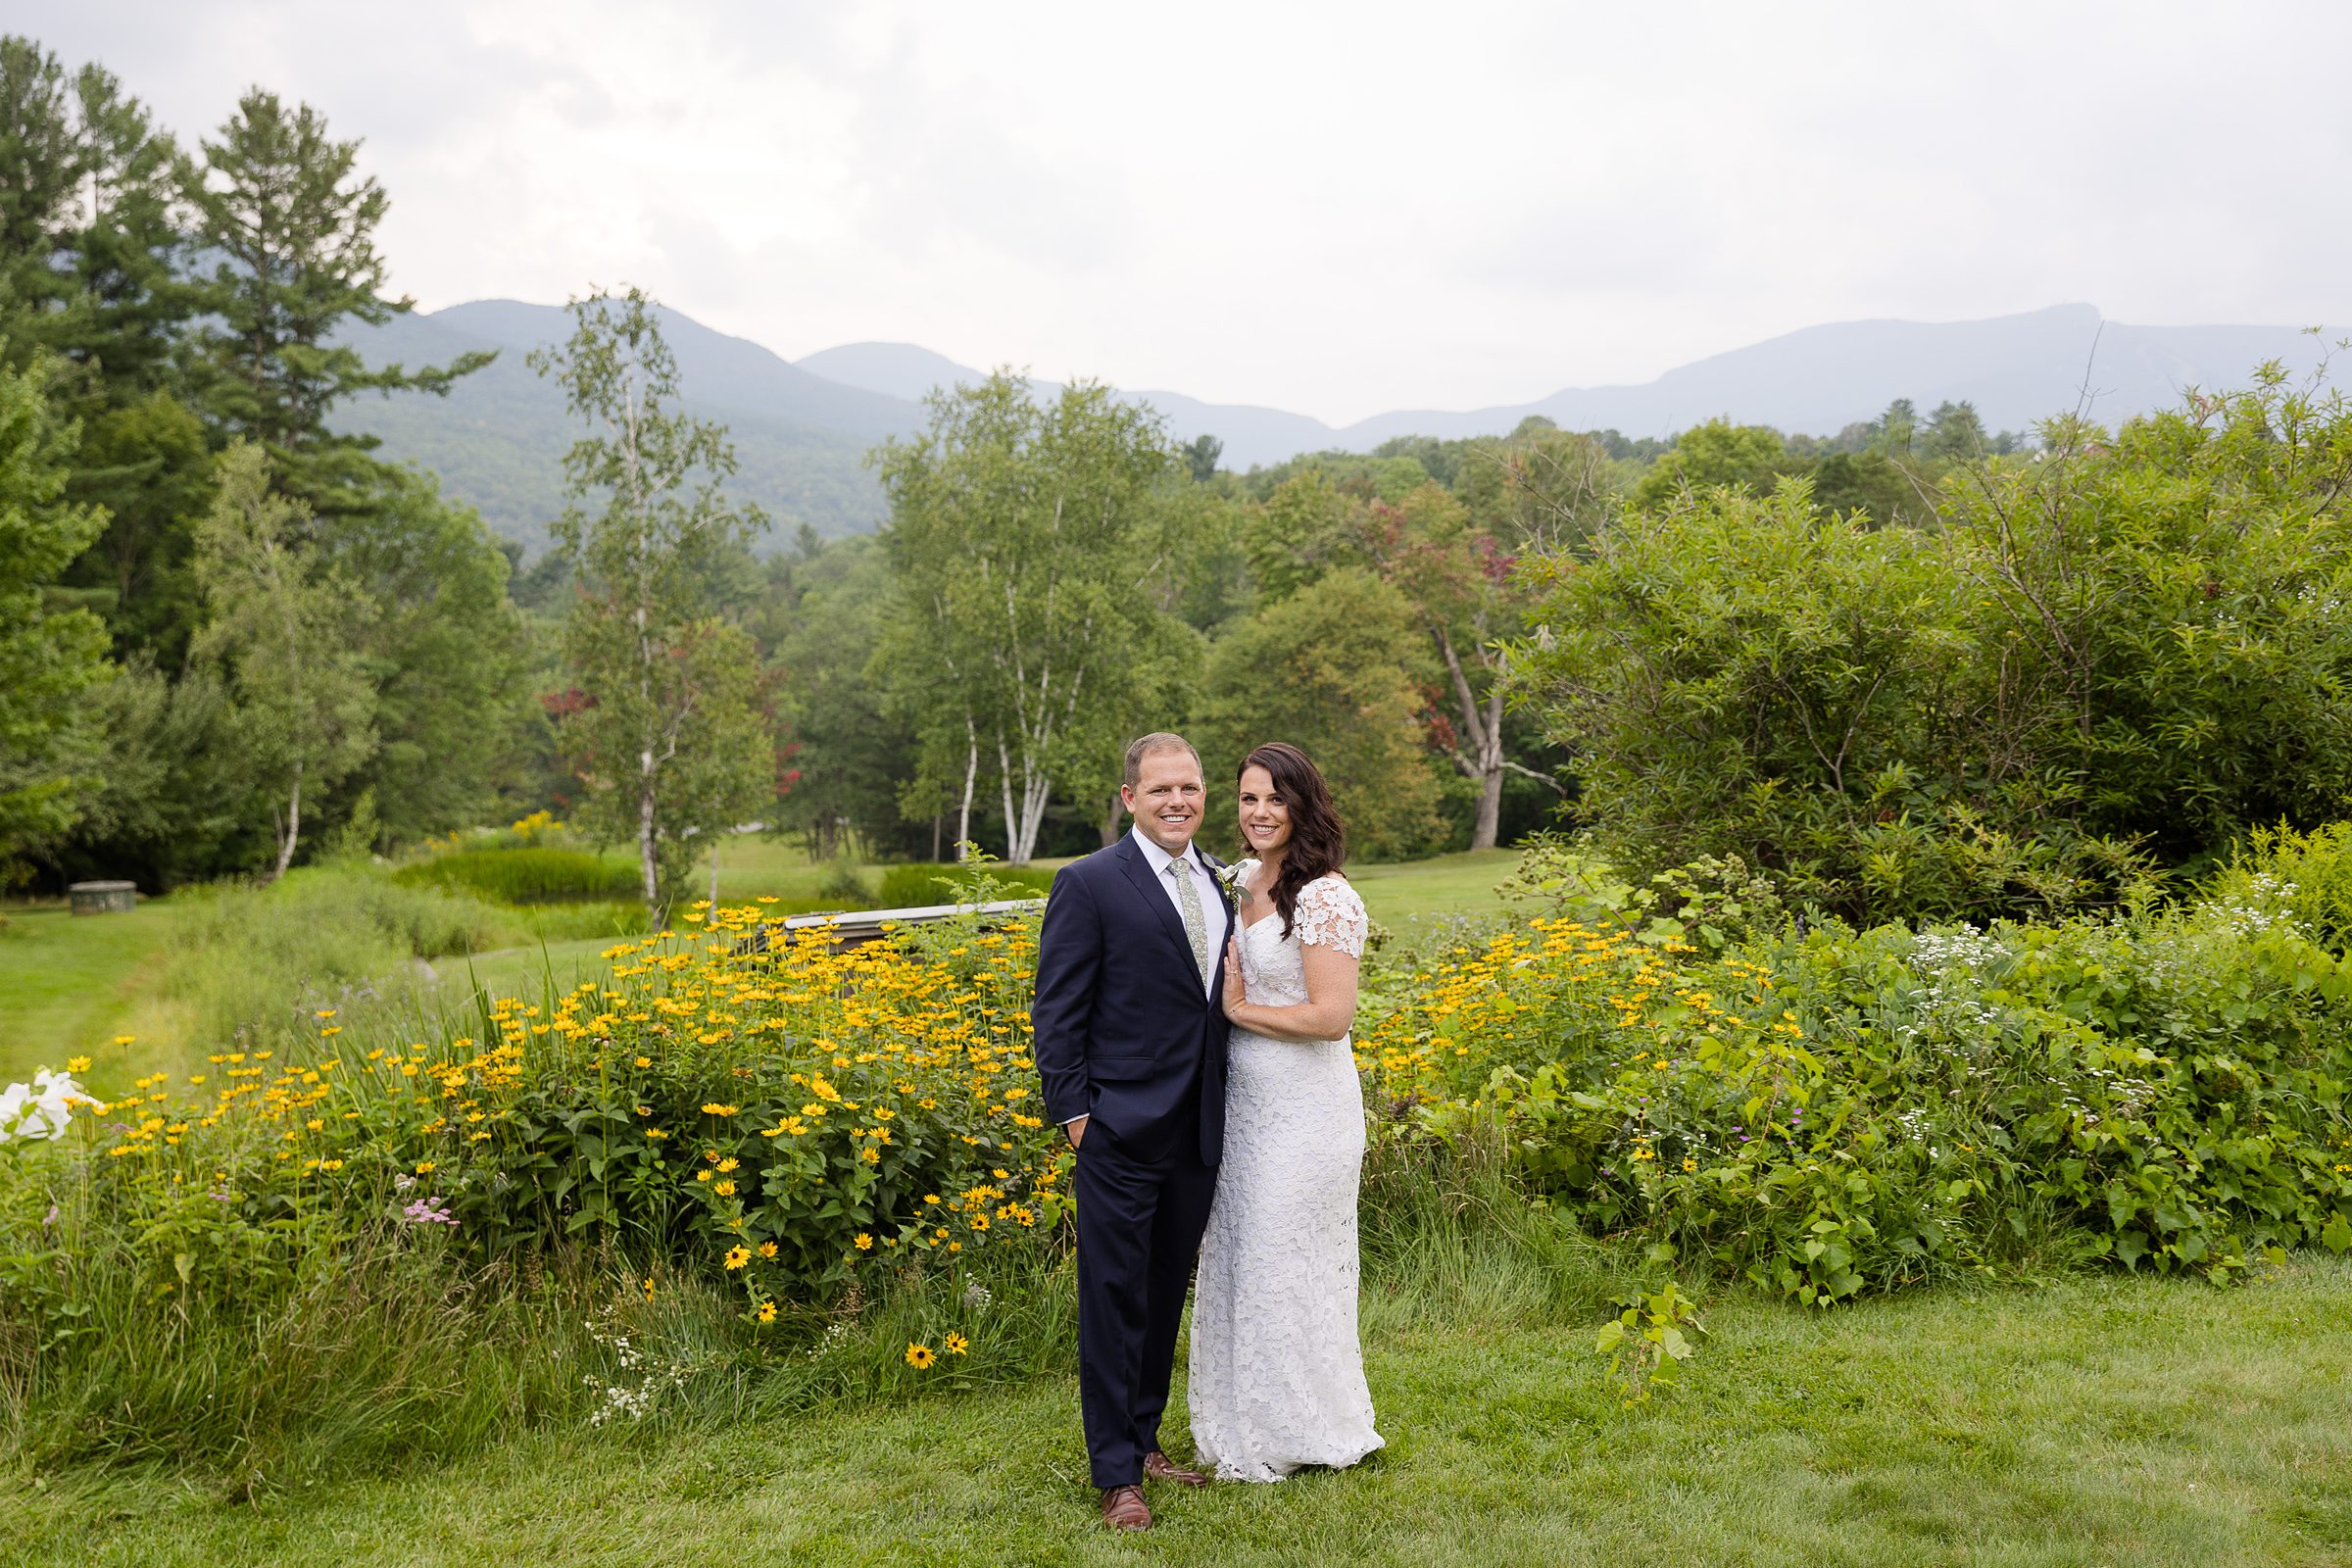 Outdoor summer reception at the Stowehof Inn in Stowe, Vermont 